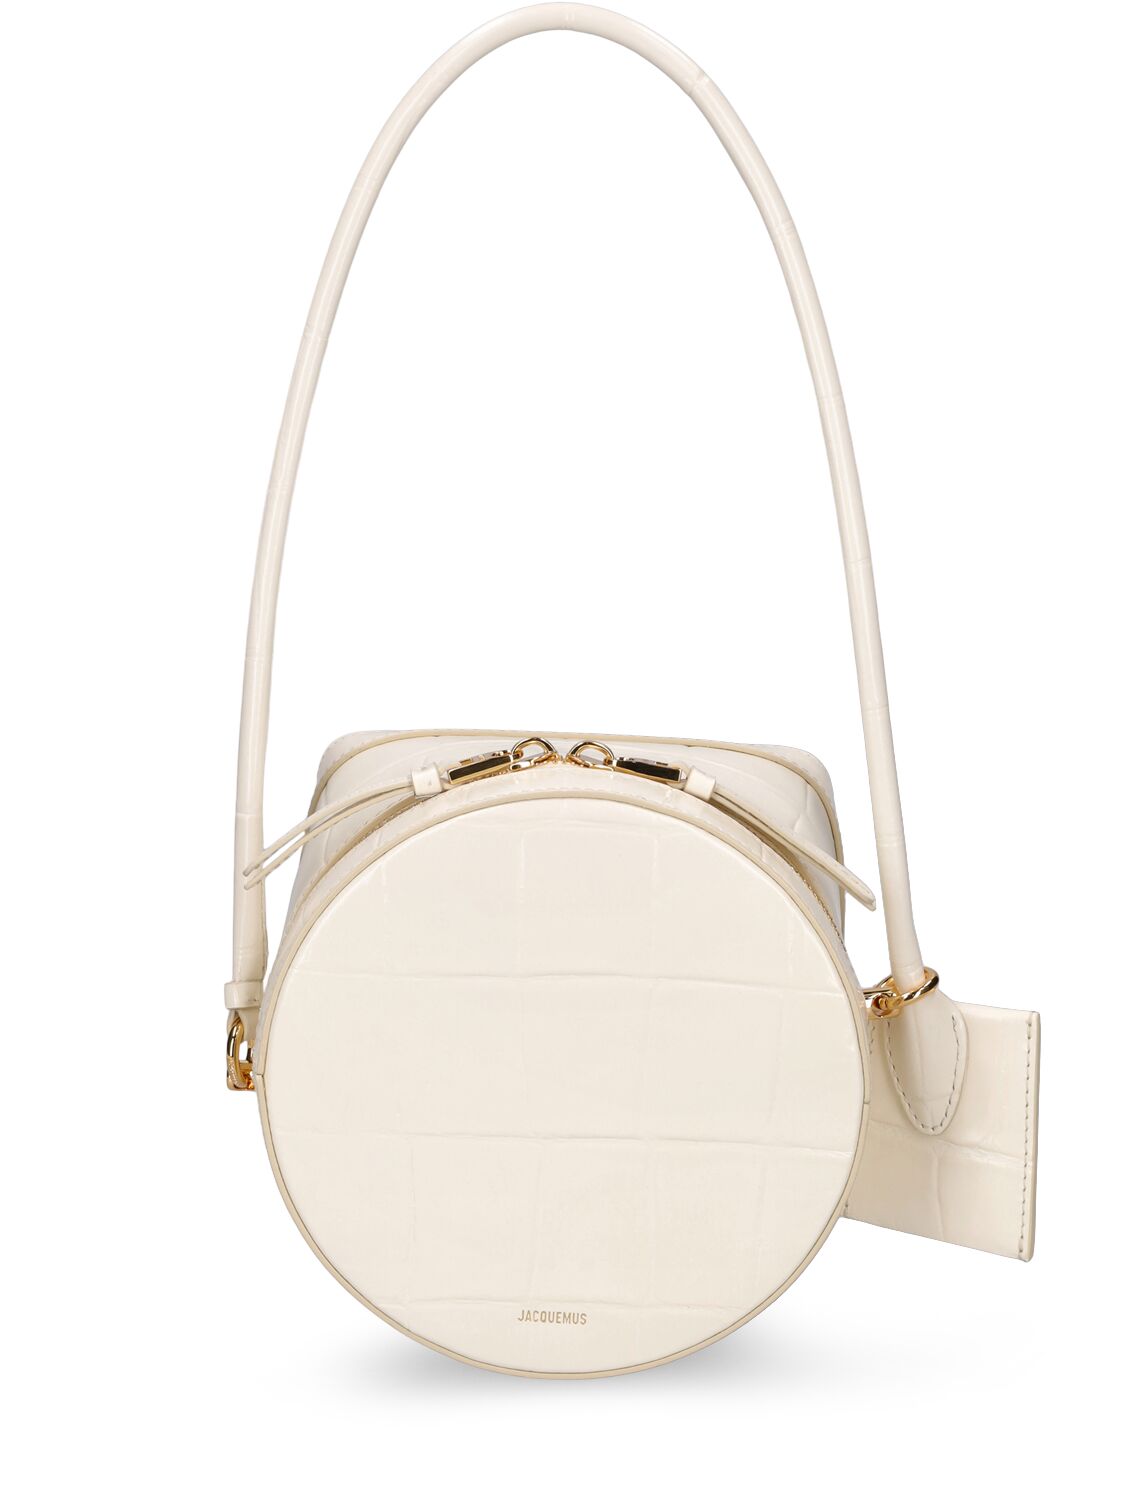 Jacquemus Le Vanito Leather Top Handle Bag In Light Ivory